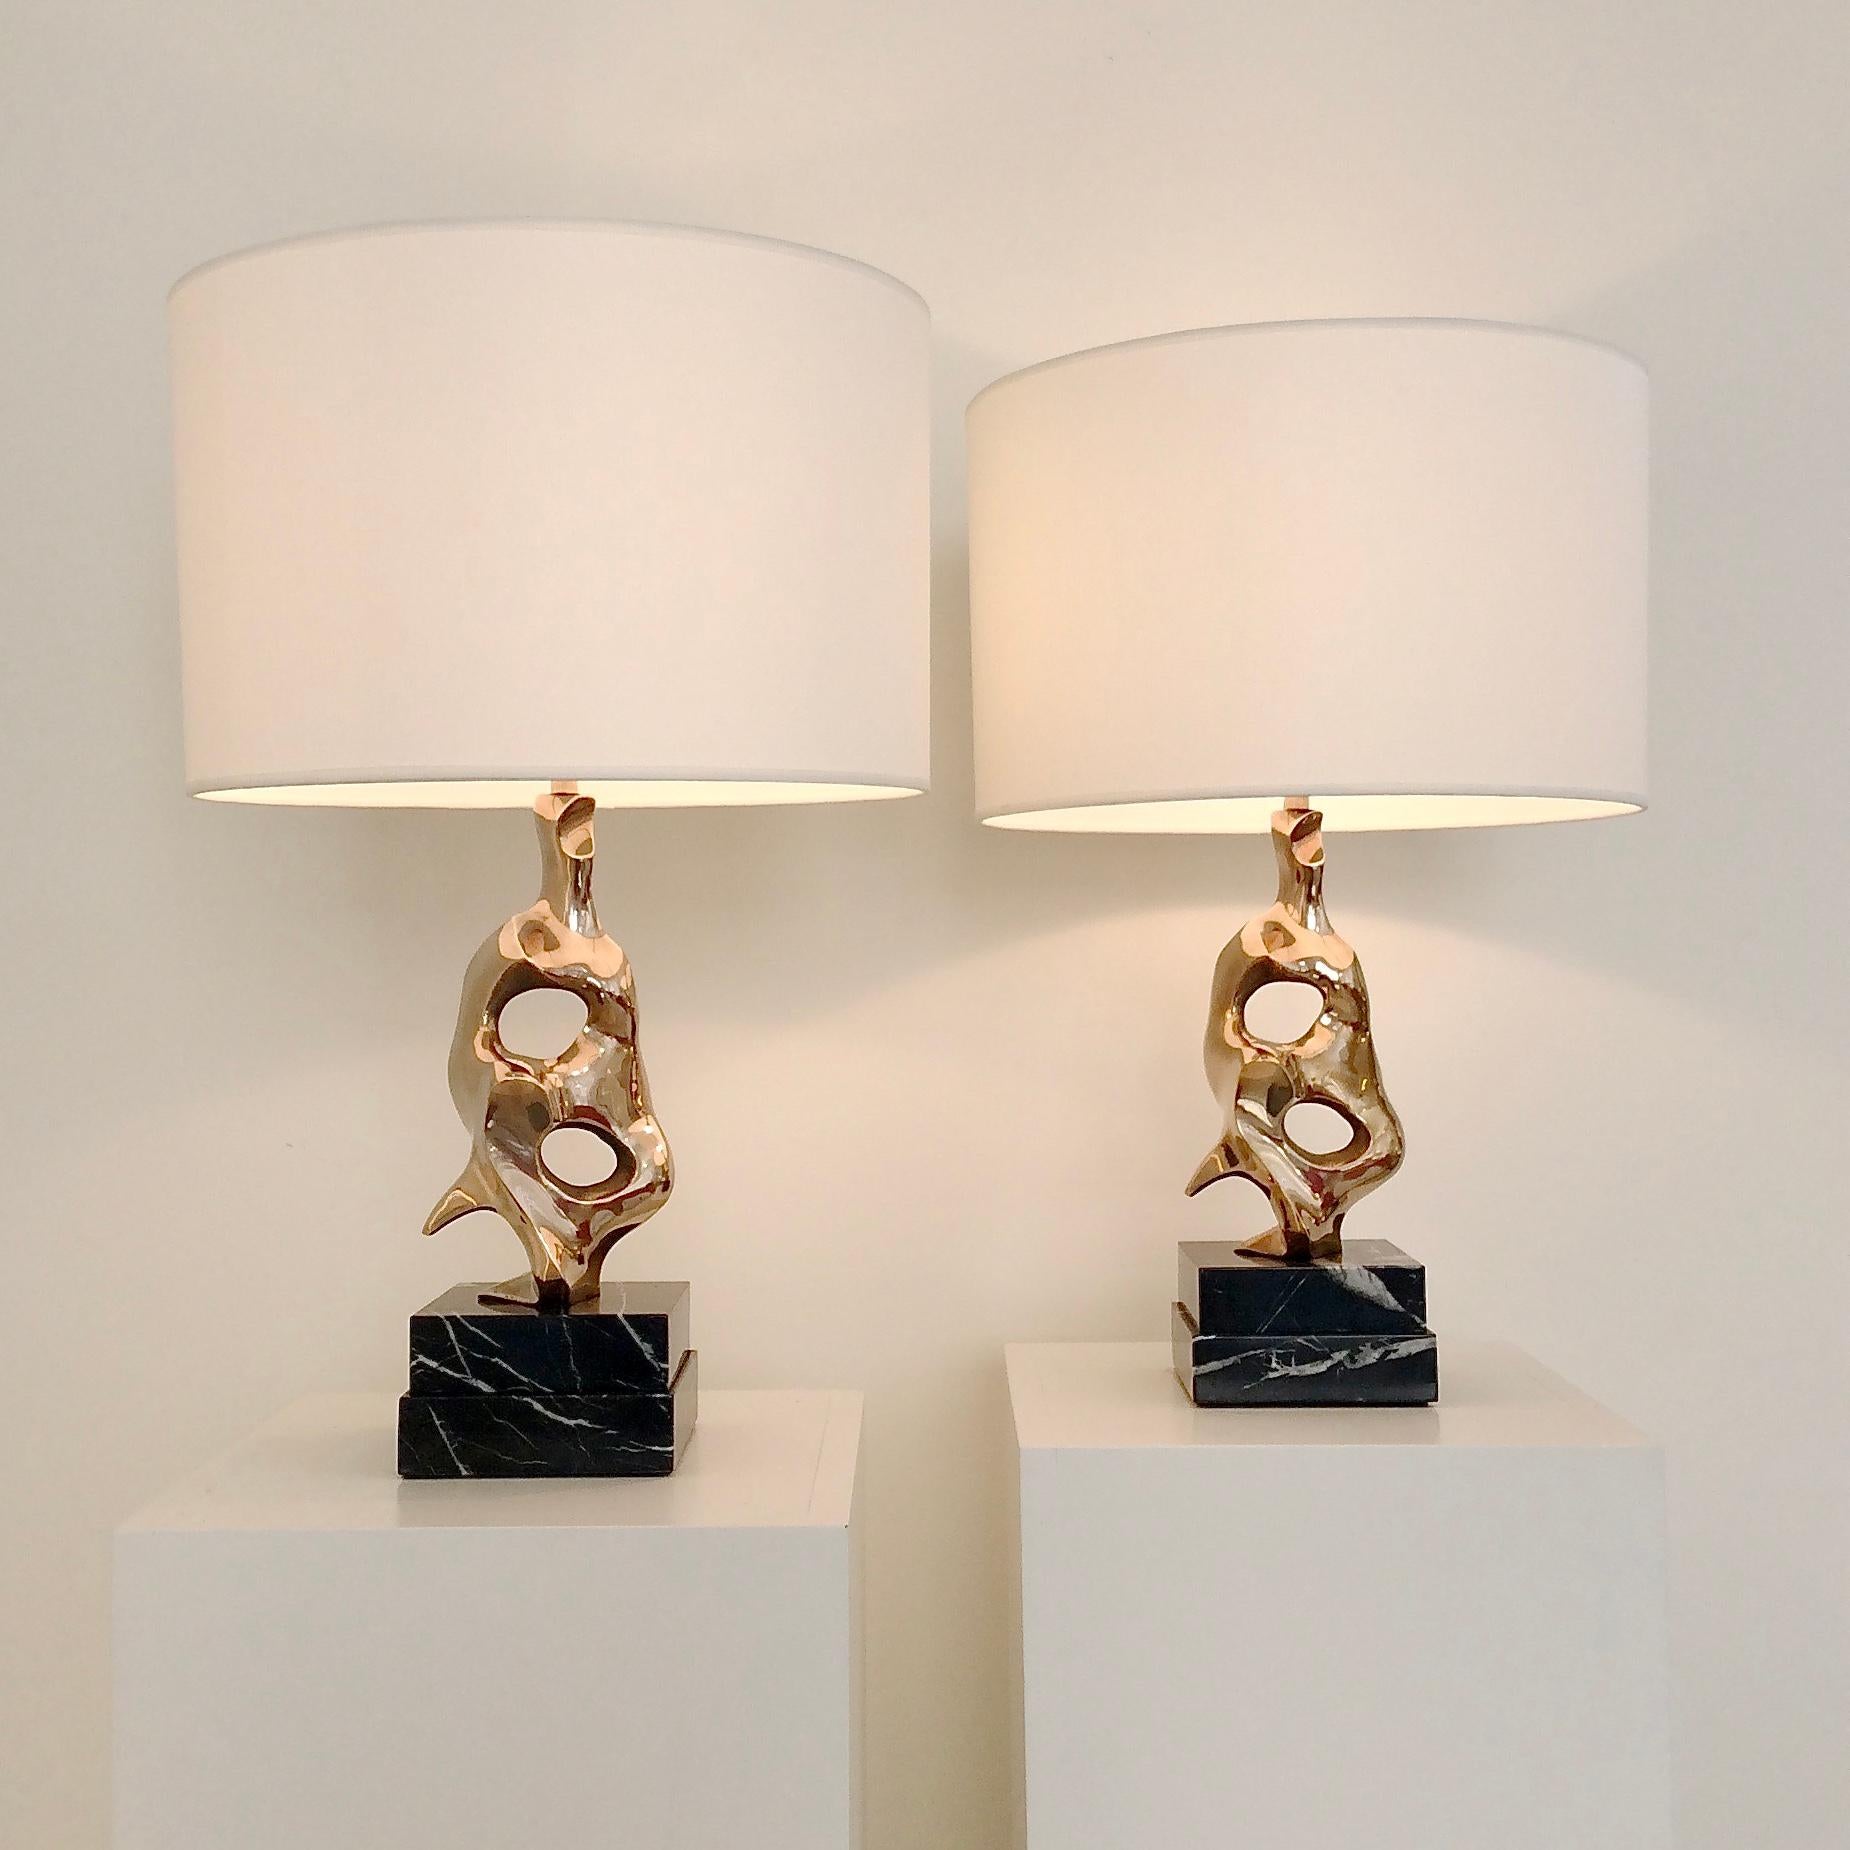 Michel Jaubert pair of sculptural table lamps, circa 1975, France.
Signed M.Jaubert.
Polished bronze, black marble, new fabric shade. Signed.
Dimensions: total height: 53 cm H, diameter: 35 cm.
Height of the bronze: 23 cm. Height of the shade: